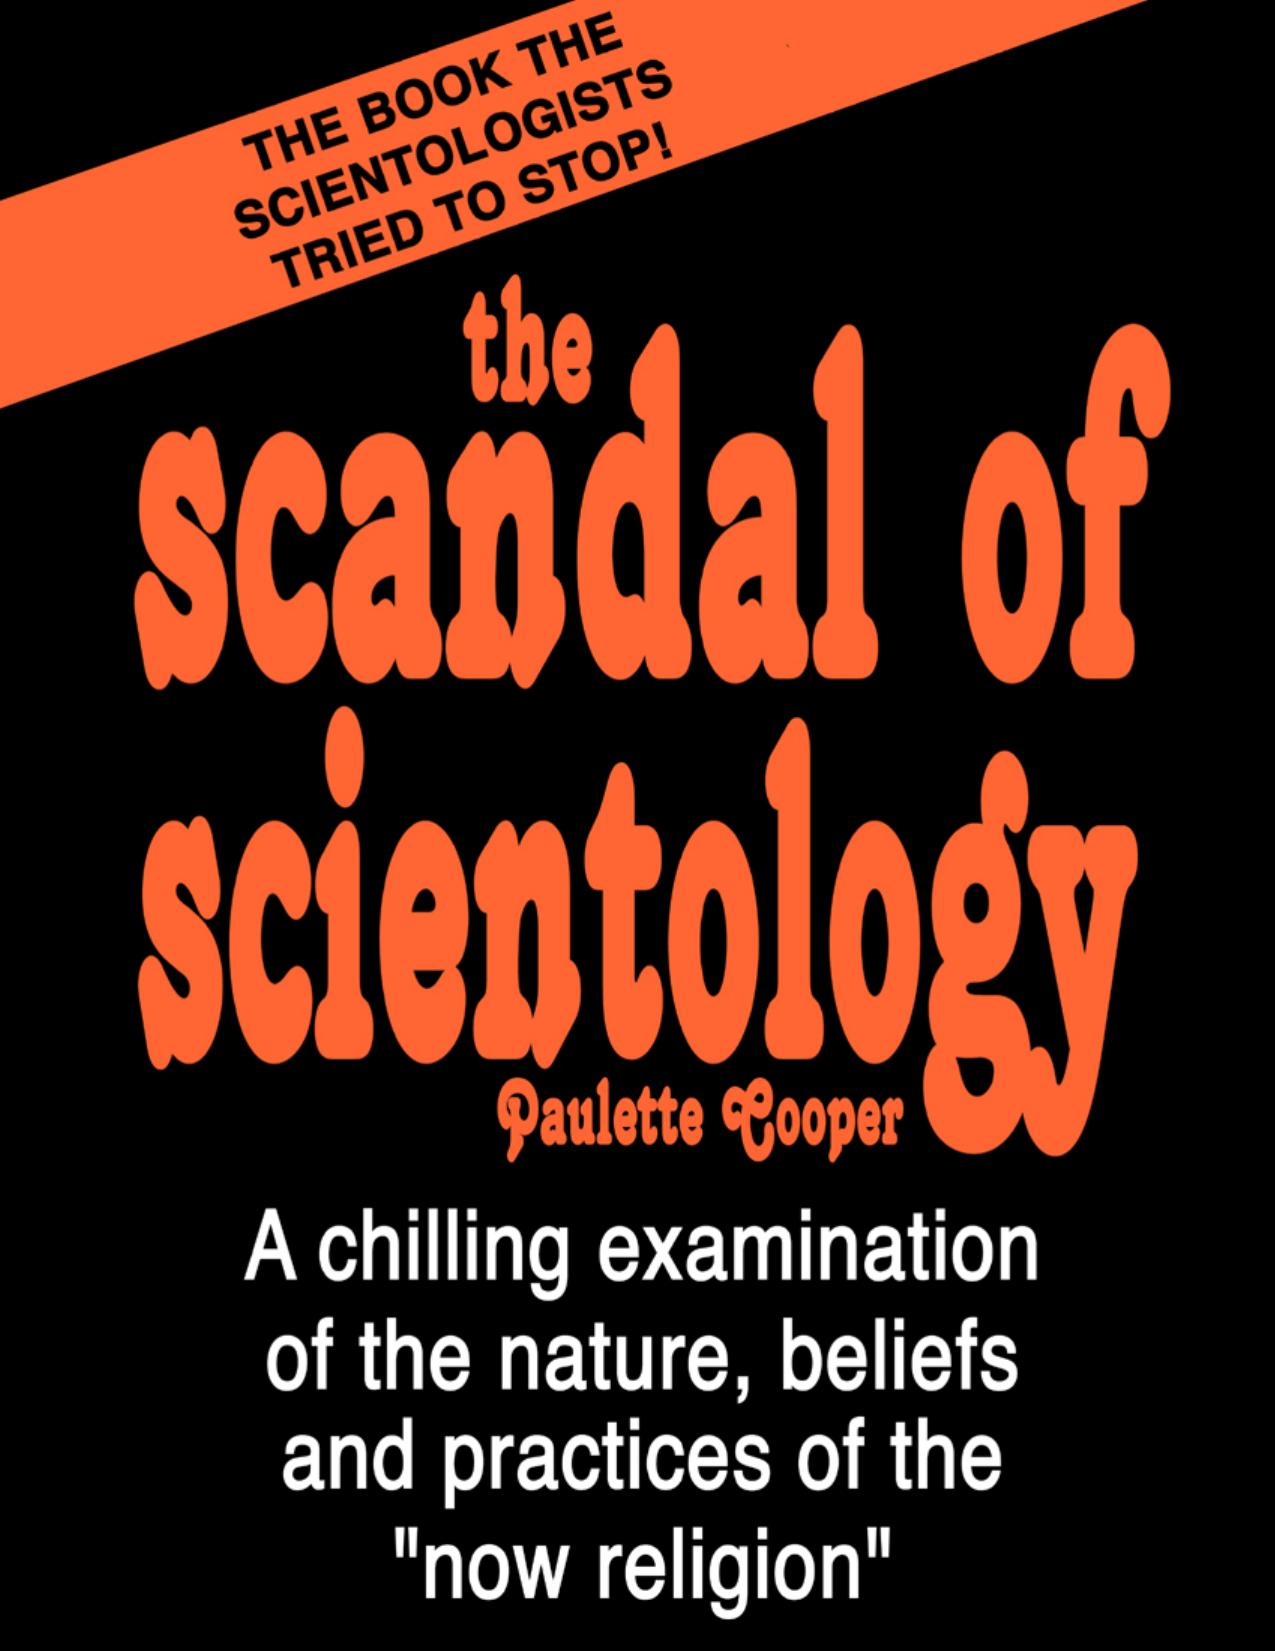 The Scandal of Scientology by Paulette Cooper